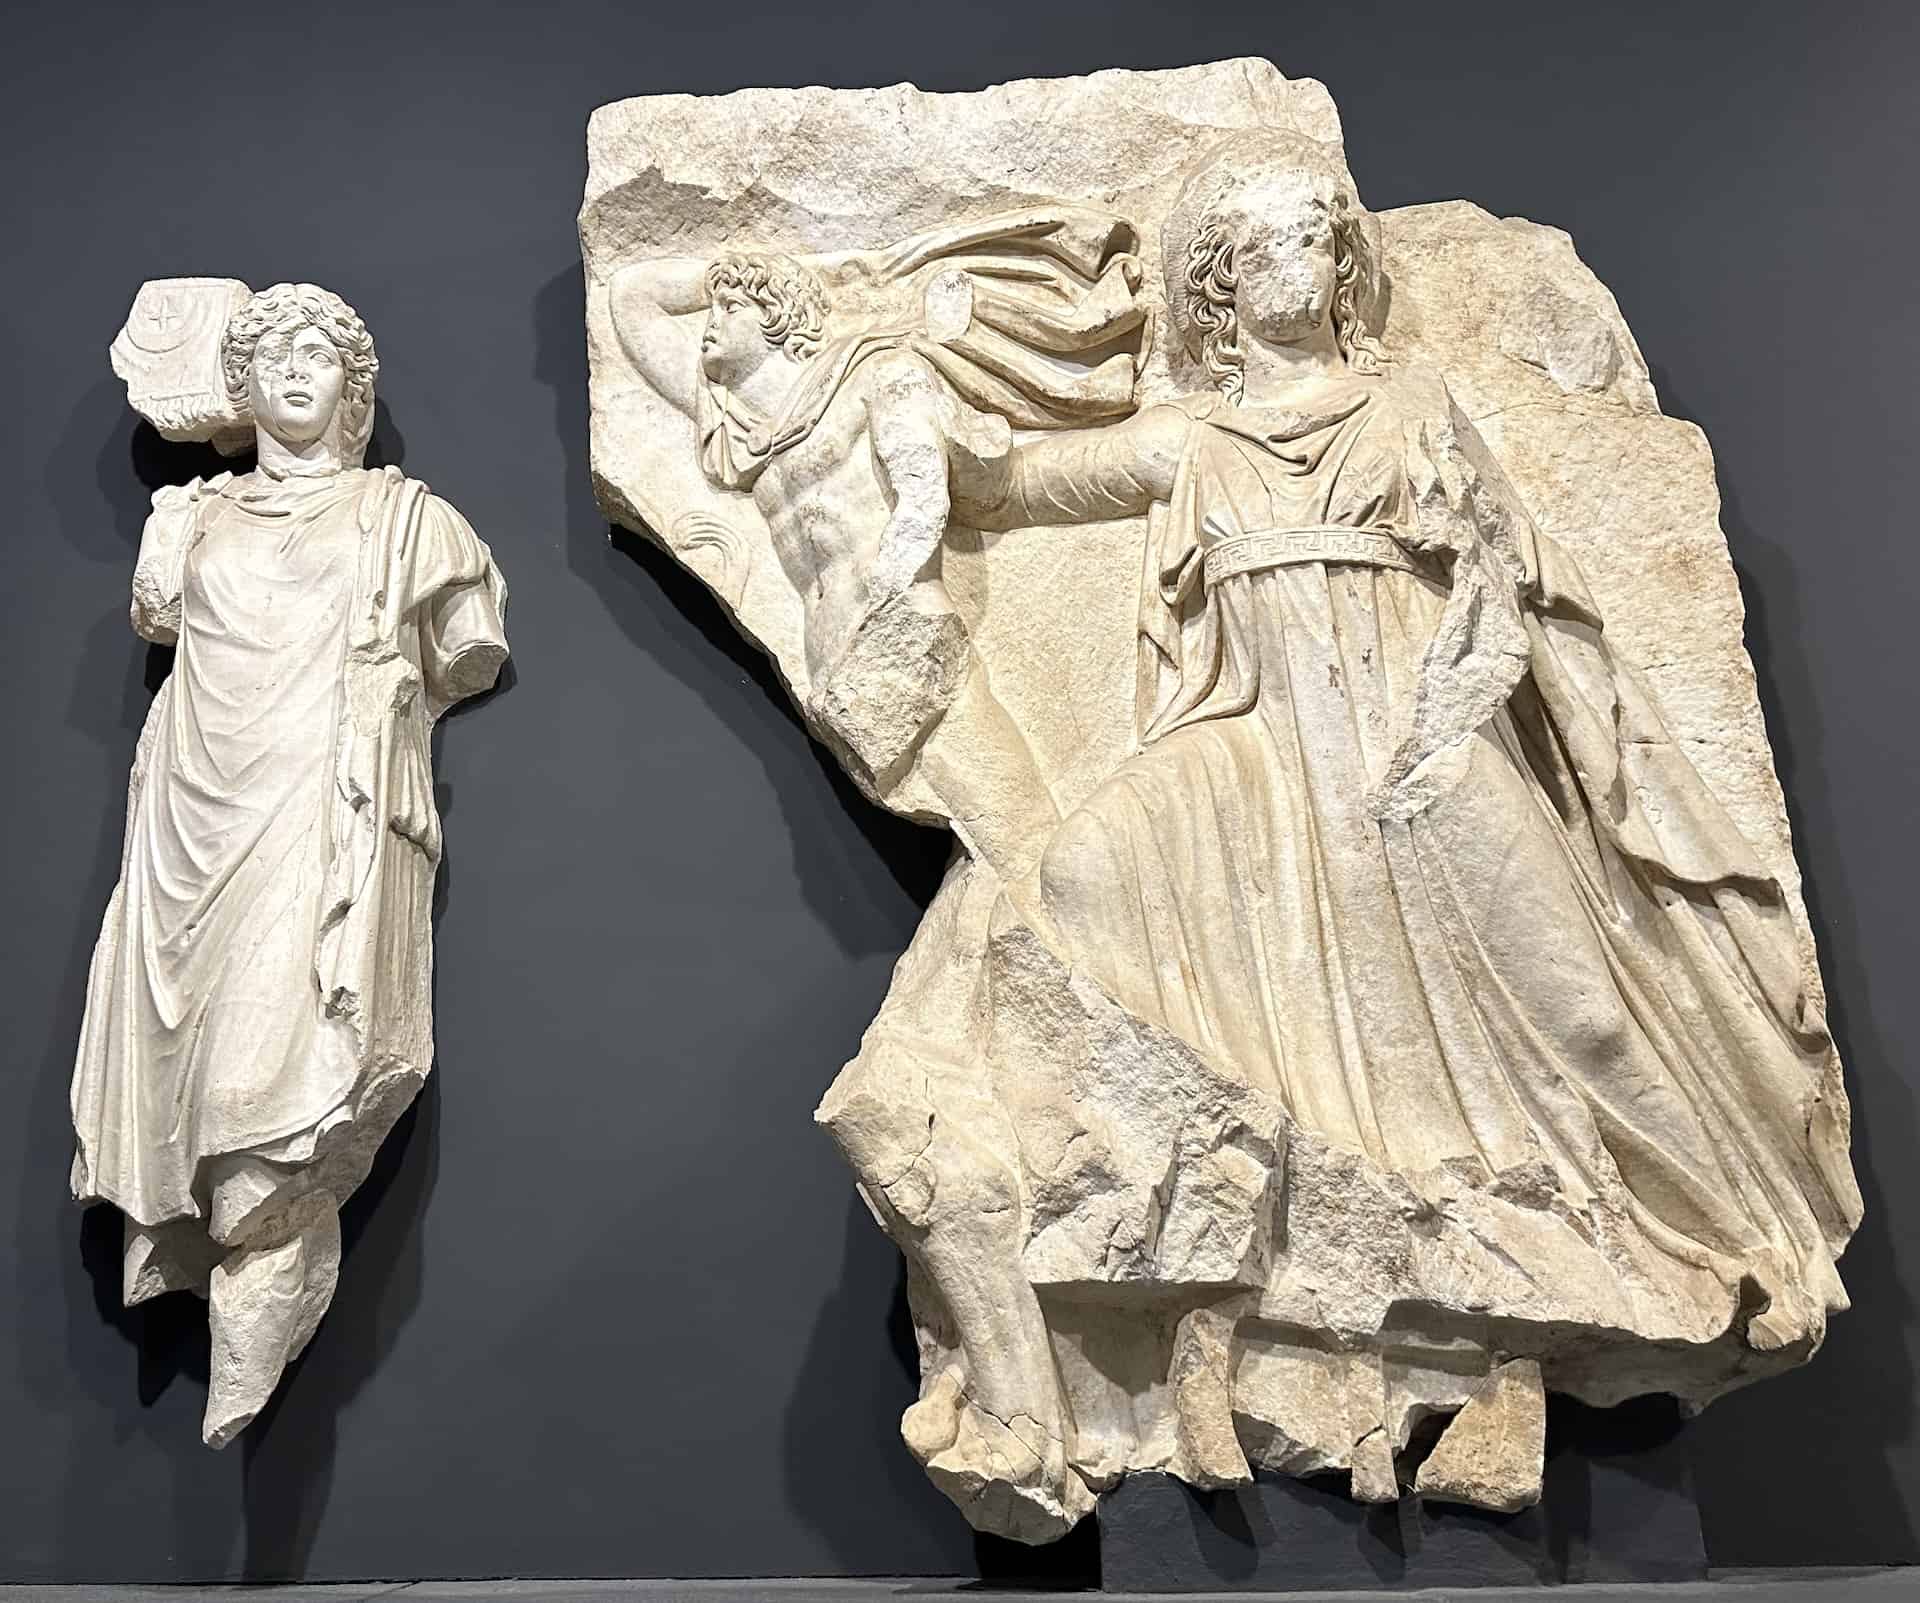 Female figure symbolizing the city of Currhae holding a vexillum (flag)(left) and Selene and Apollo Helios (right) from the Parthian Monument